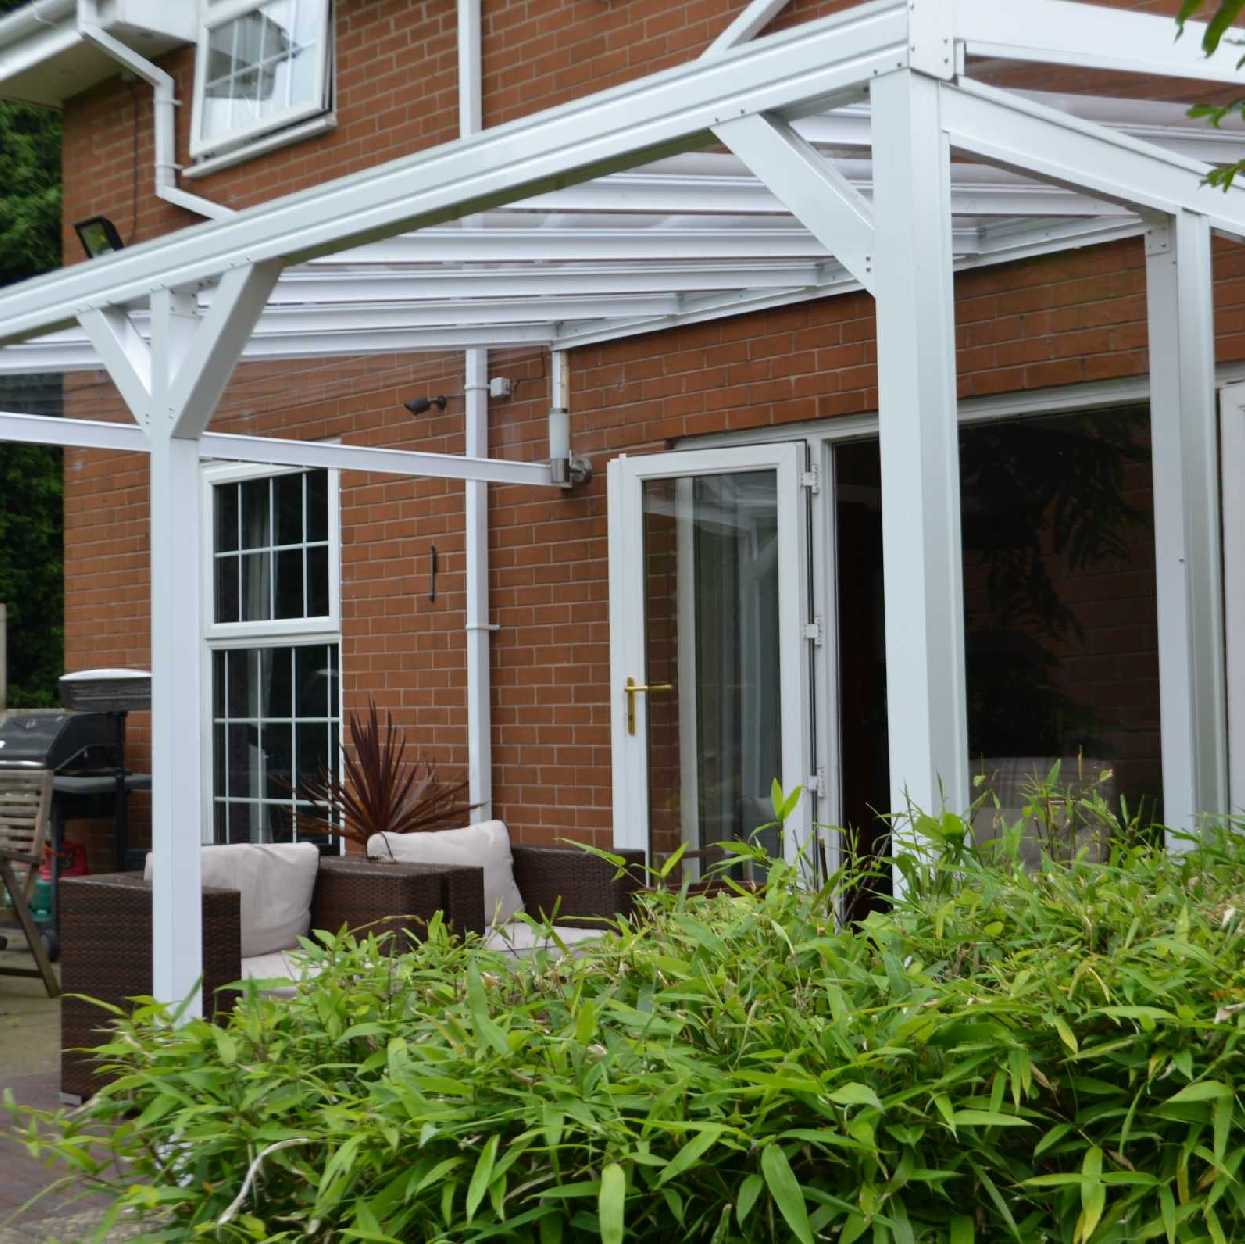 Omega Smart Lean-To Canopy, White with 6mm Glass Clear Plate Polycarbonate Glazing - 6.3m (W) x 3.0m (P), (4) Supporting Posts from Omega Build